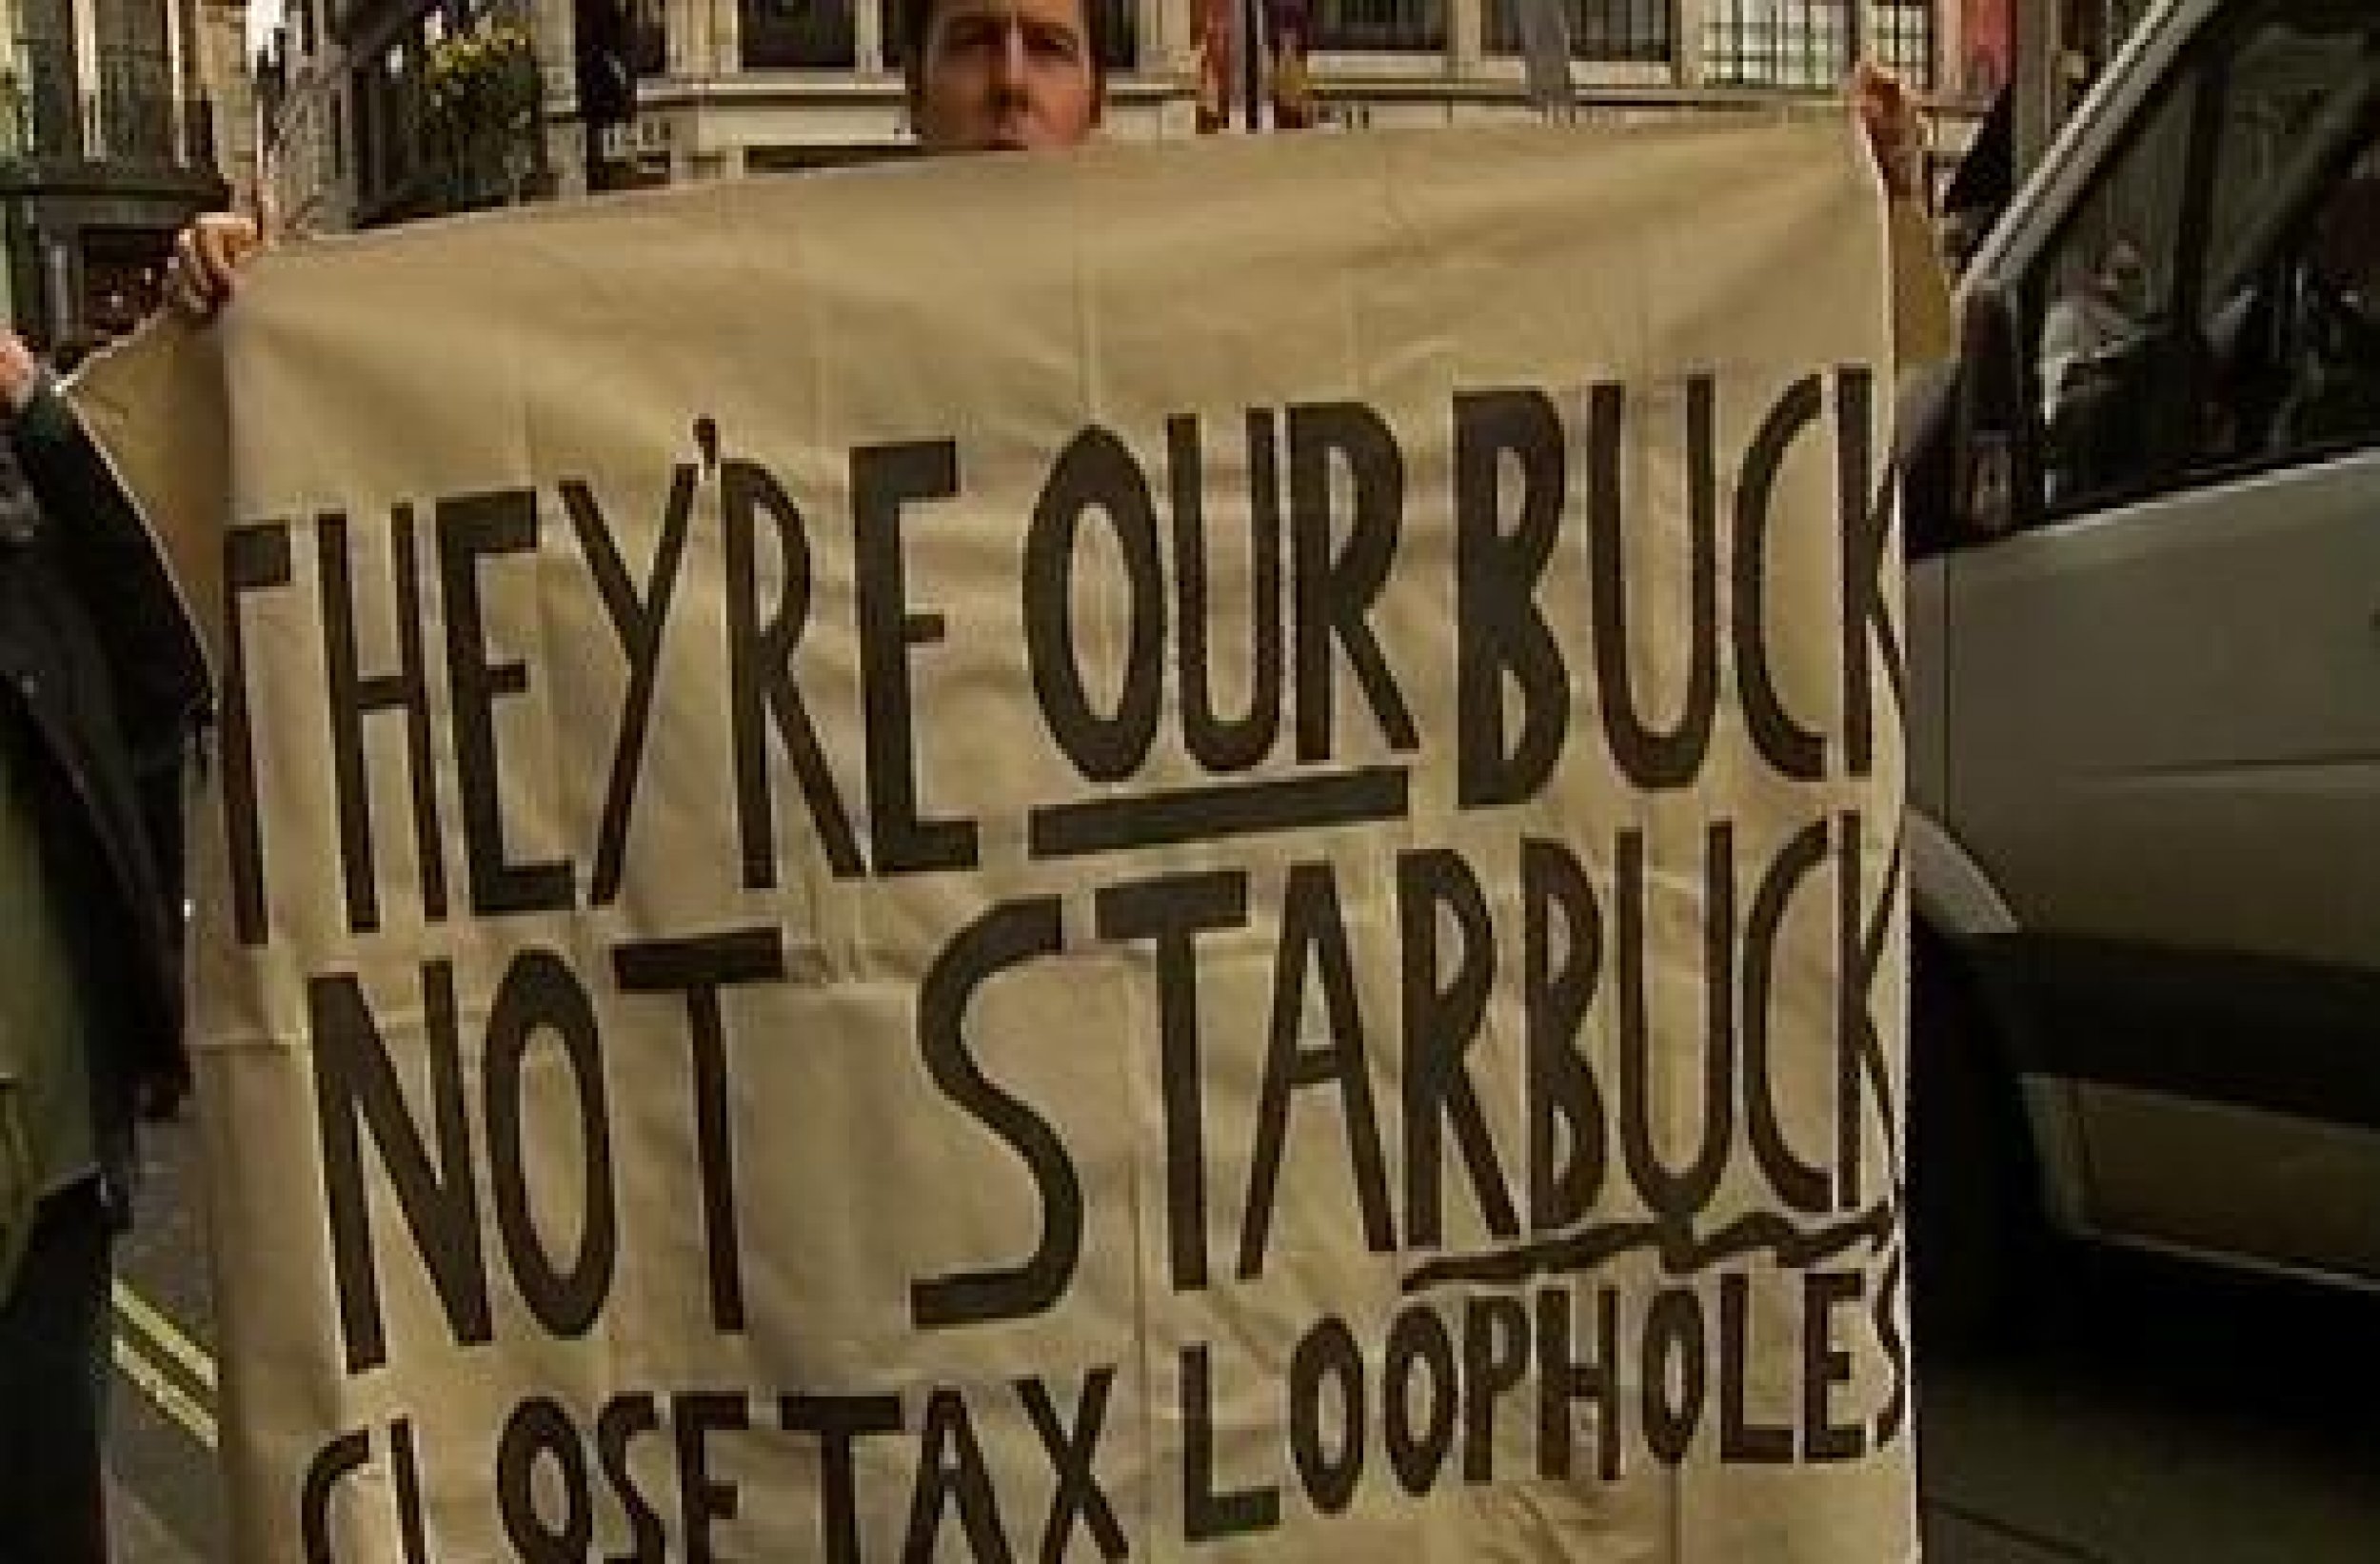 Starbucks Protesters Take Over London Demanding Tax Loopholes Be Closed